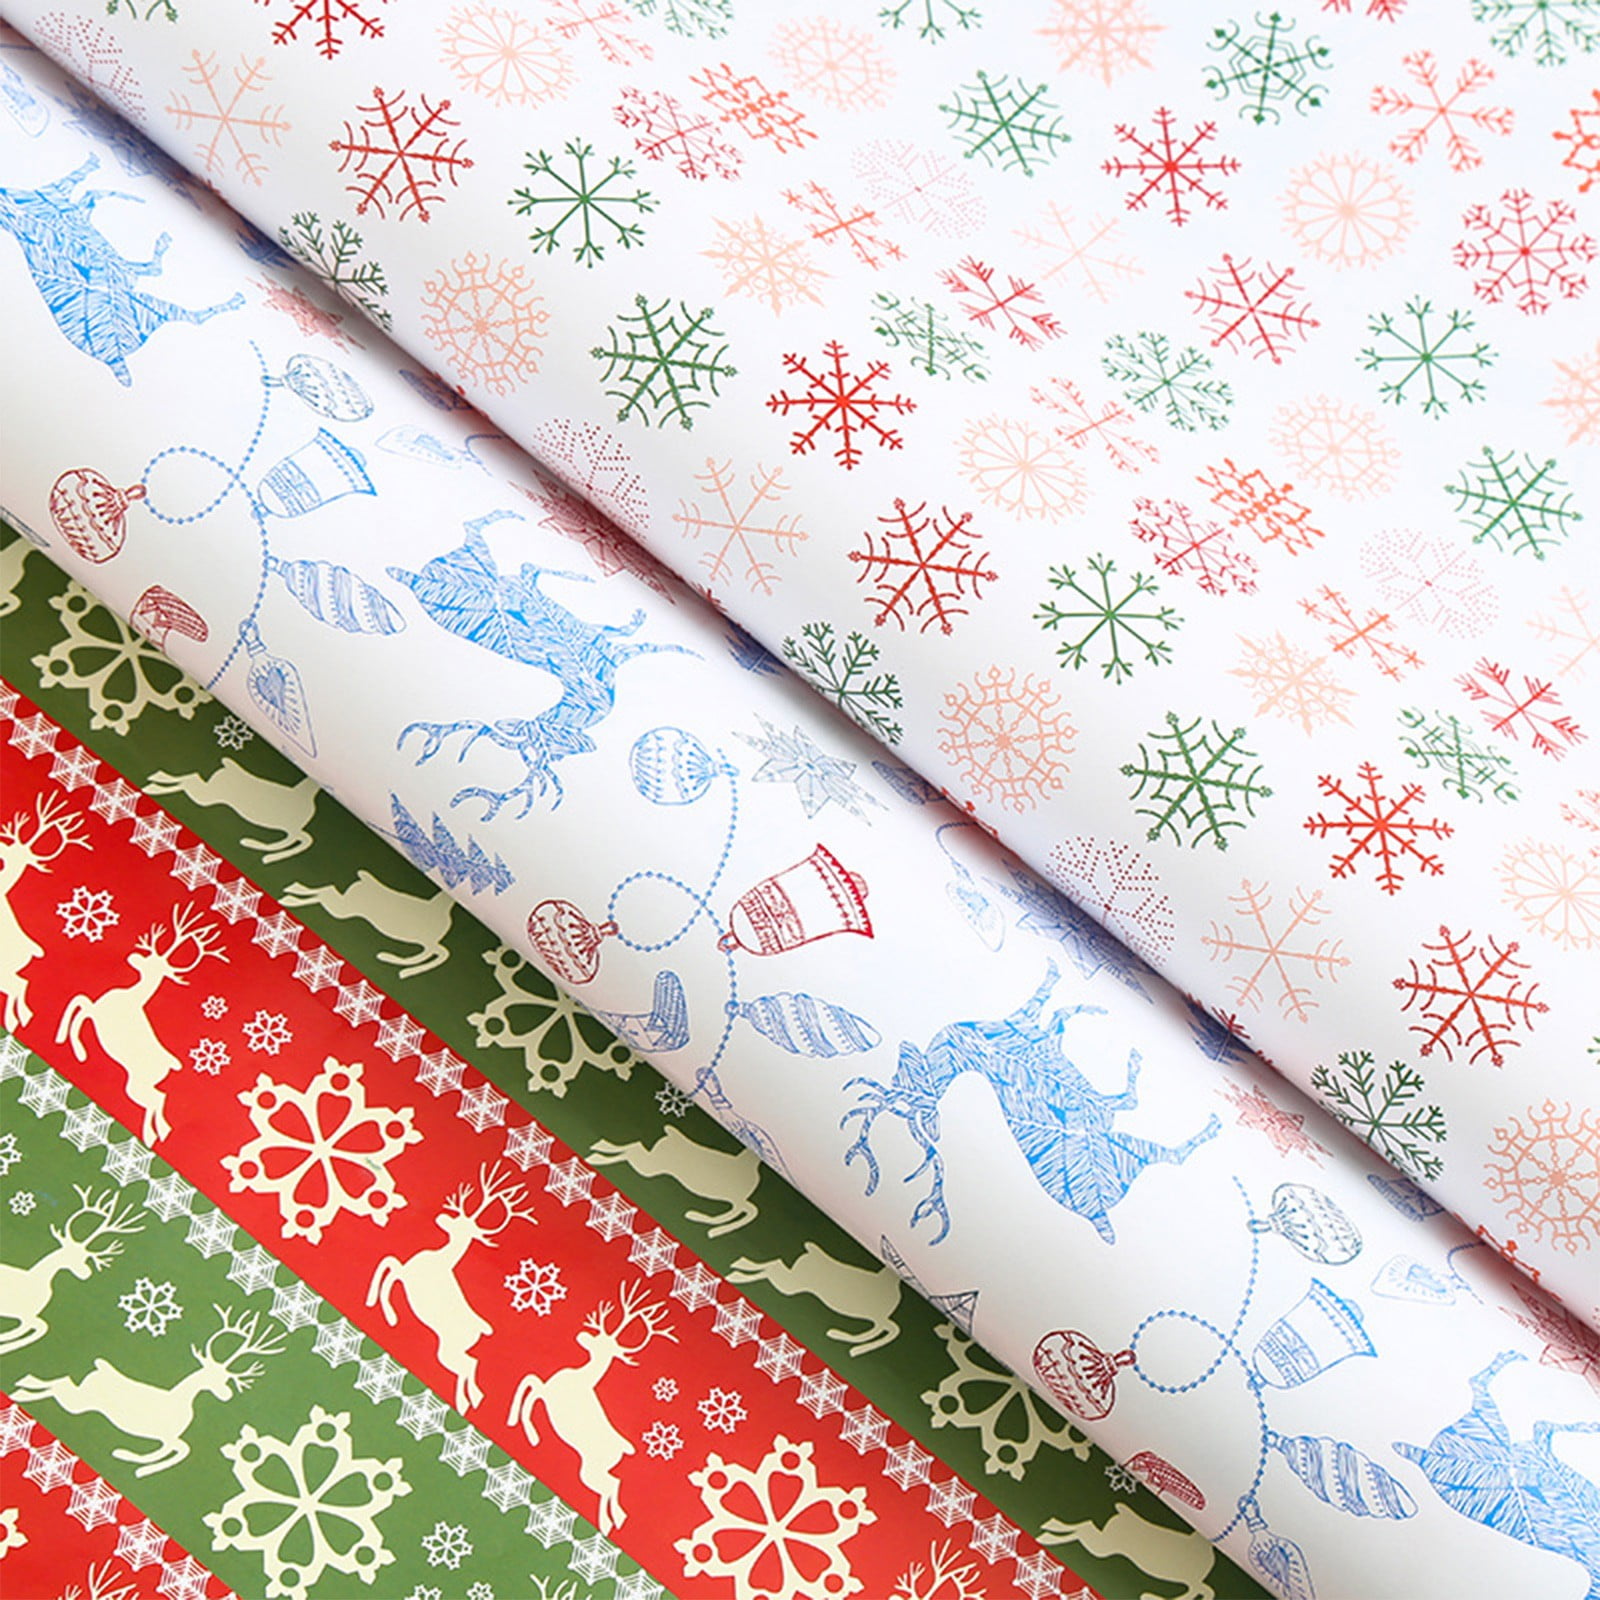 HSMQHJWE Birthday Wrapping Paper Boys 1PCS DIY Men's Women's Children's  Christmas Wrapping Paper Holiday Gifts Wrapping Truck Plaid Snowflake Green  Tree Christmas Design Snowflake Car Hippo Wrapping 